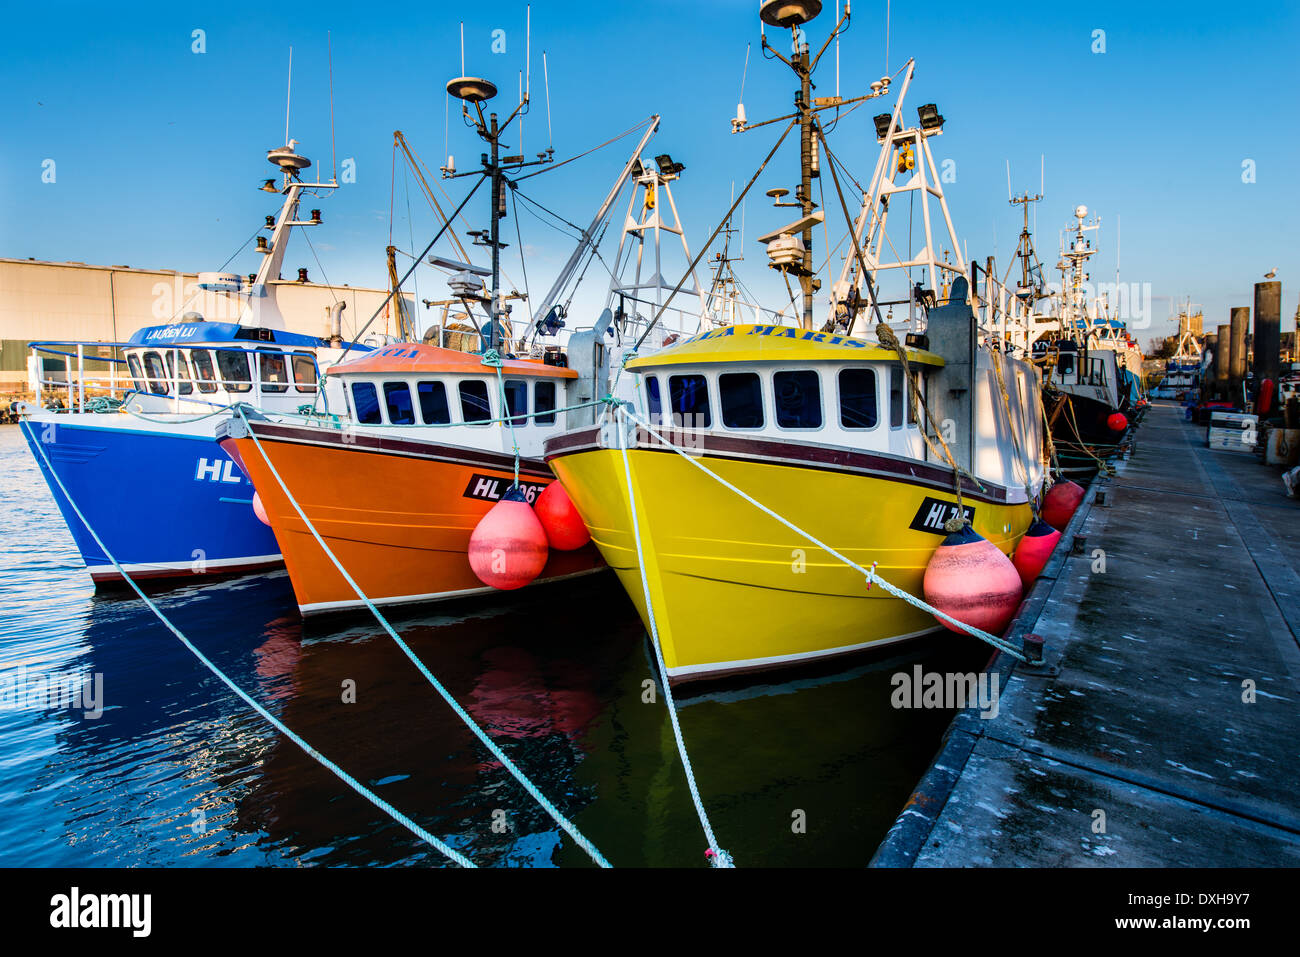 Three brightly coloured trawler fishing boats tied up together on a pontoon in a harbour. Stock Photo